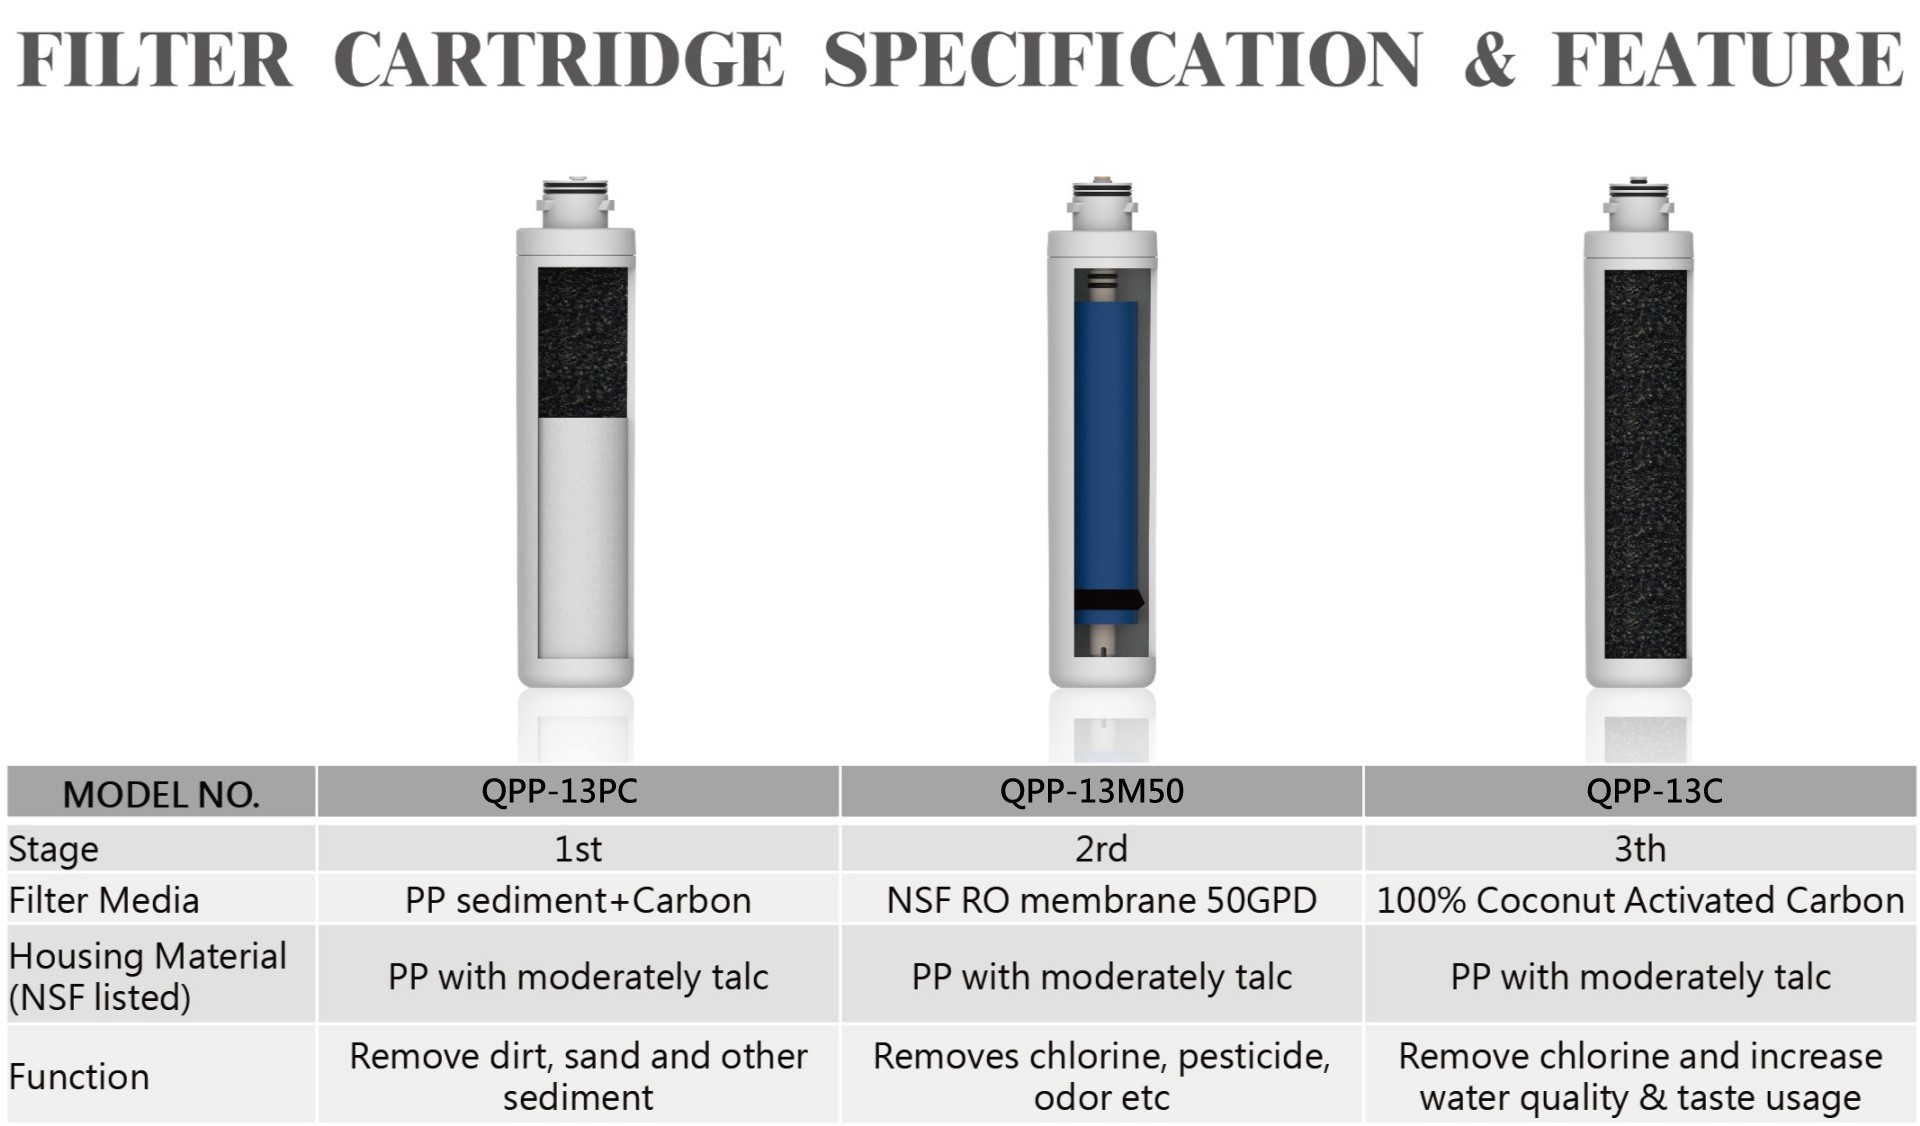 FILTER CARTRIDGE SPECIFICATION&FEATURE